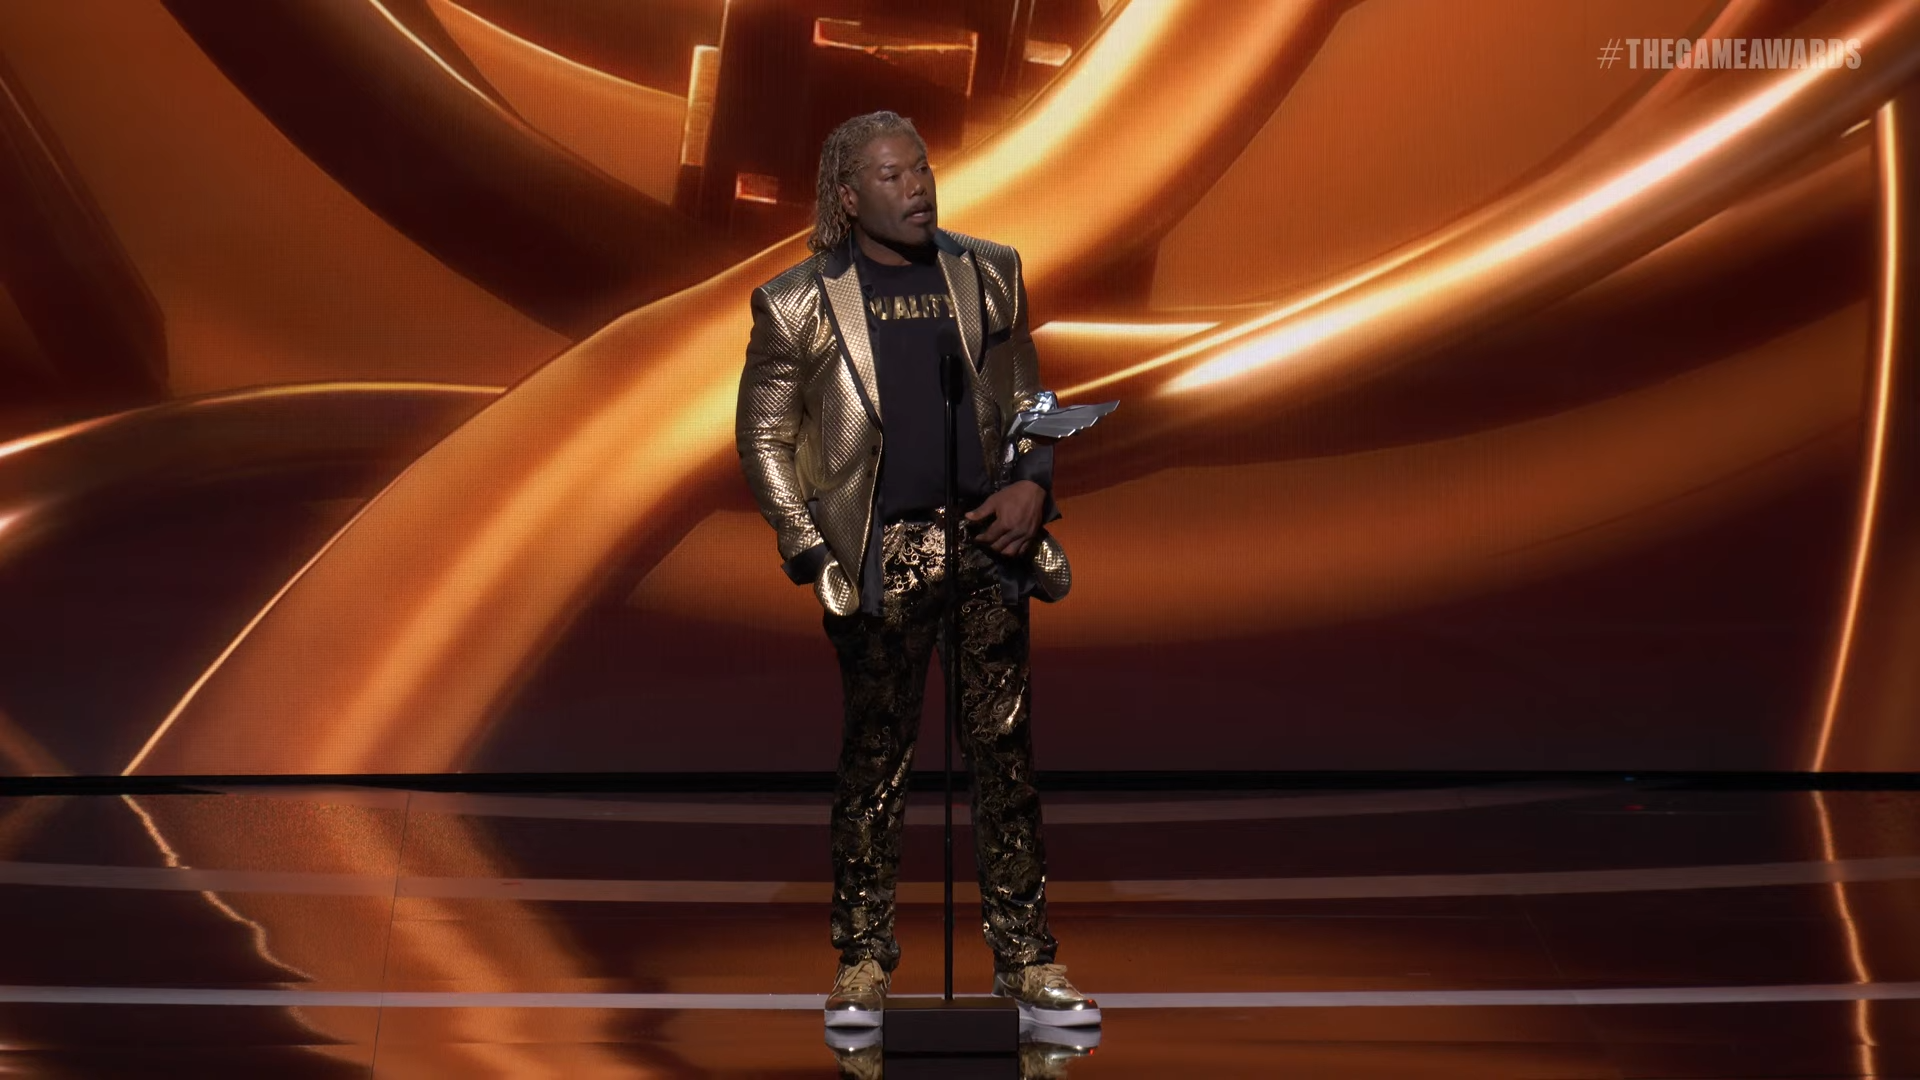 Christopher Judge accepts the award for Best Performance at The Game Awards 2022